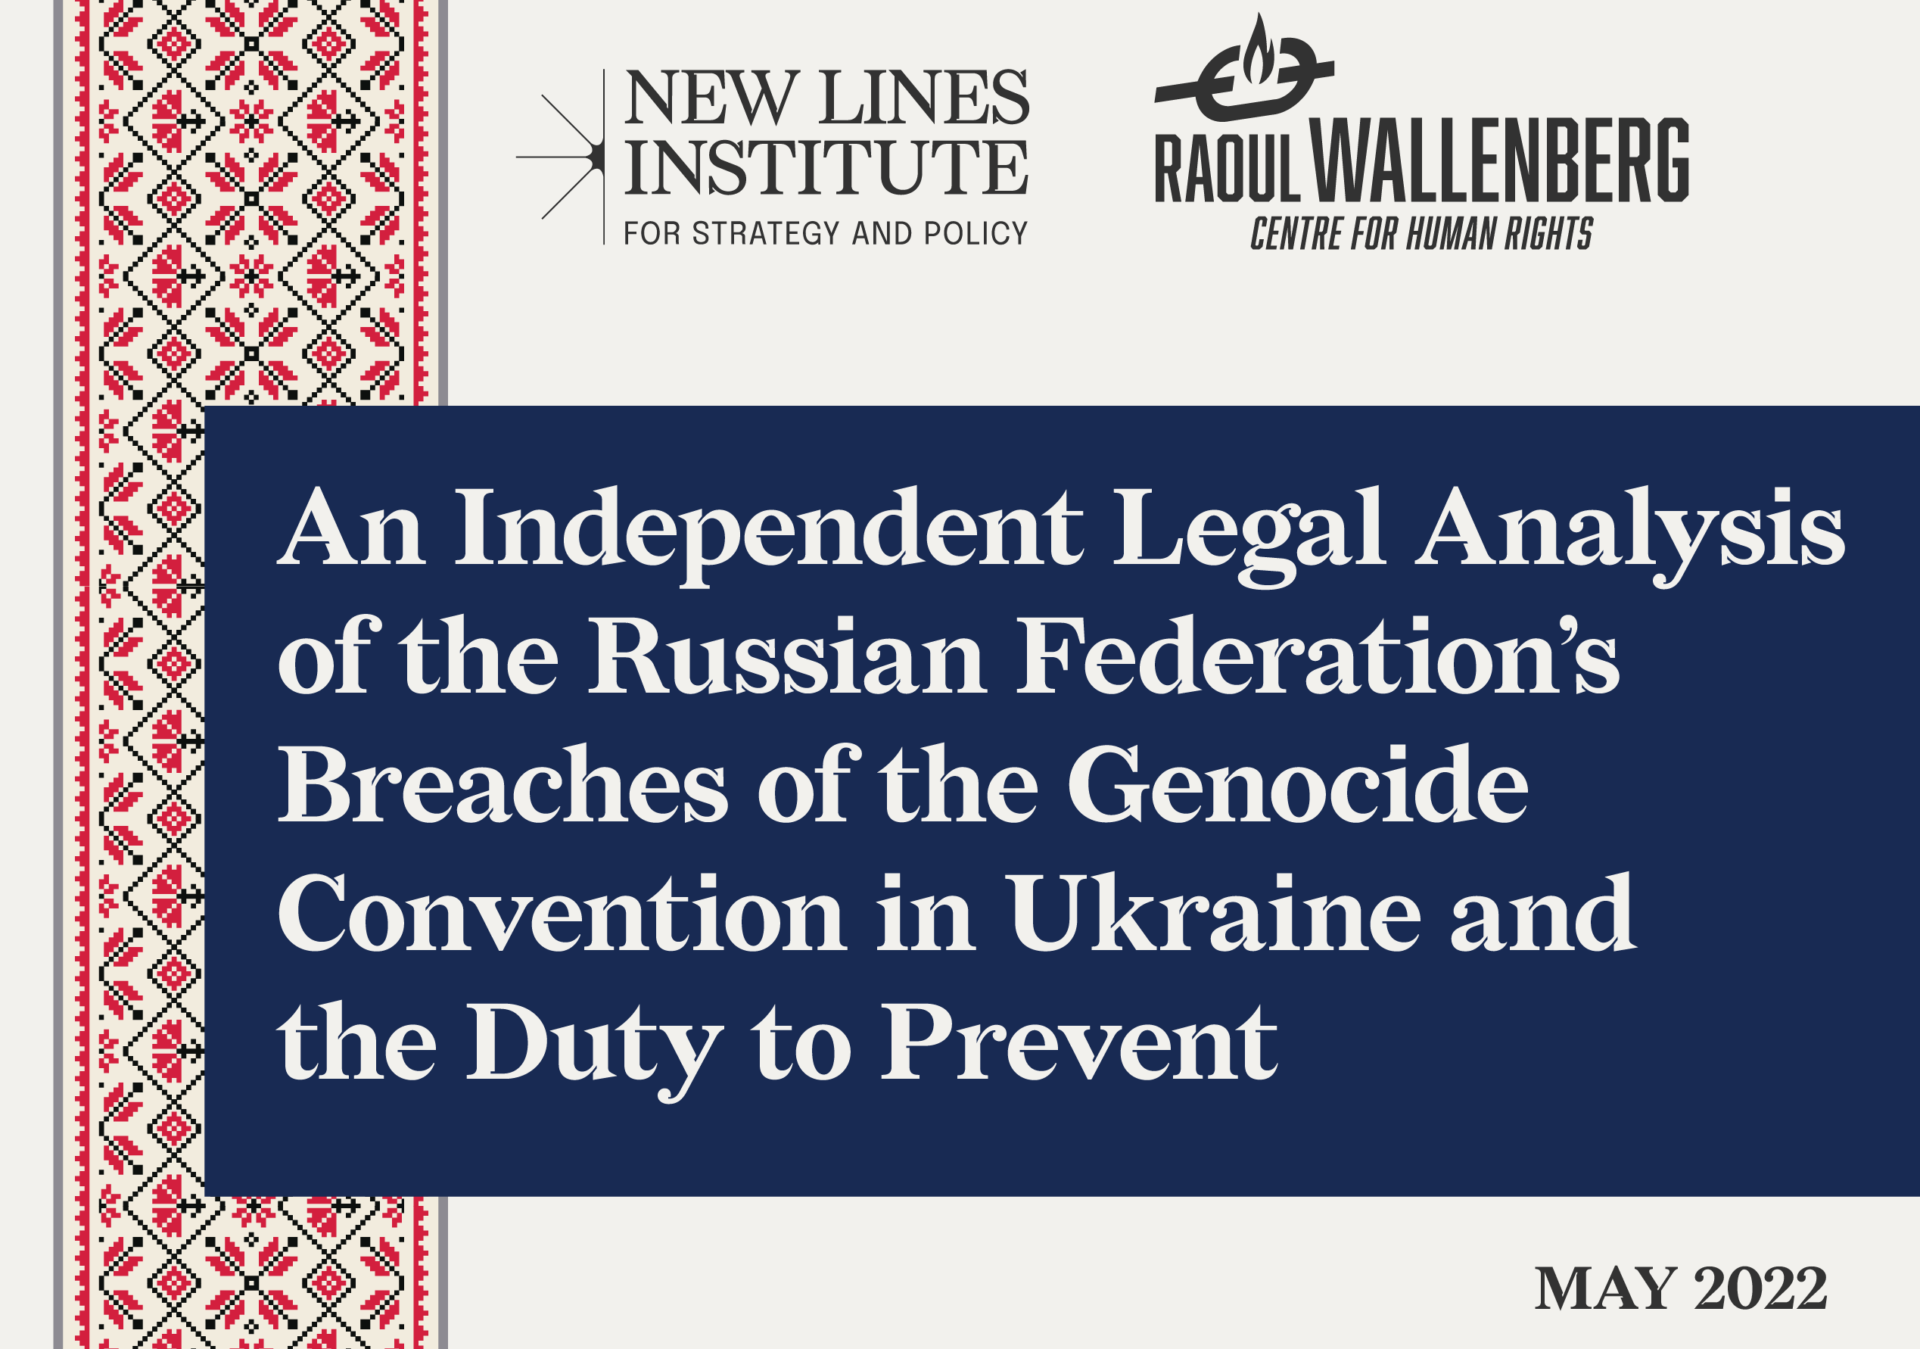 An Independent Legal Analysis of the Russian Federation’s Breaches of the Genocide Convention in Ukraine and the Duty to Prevent